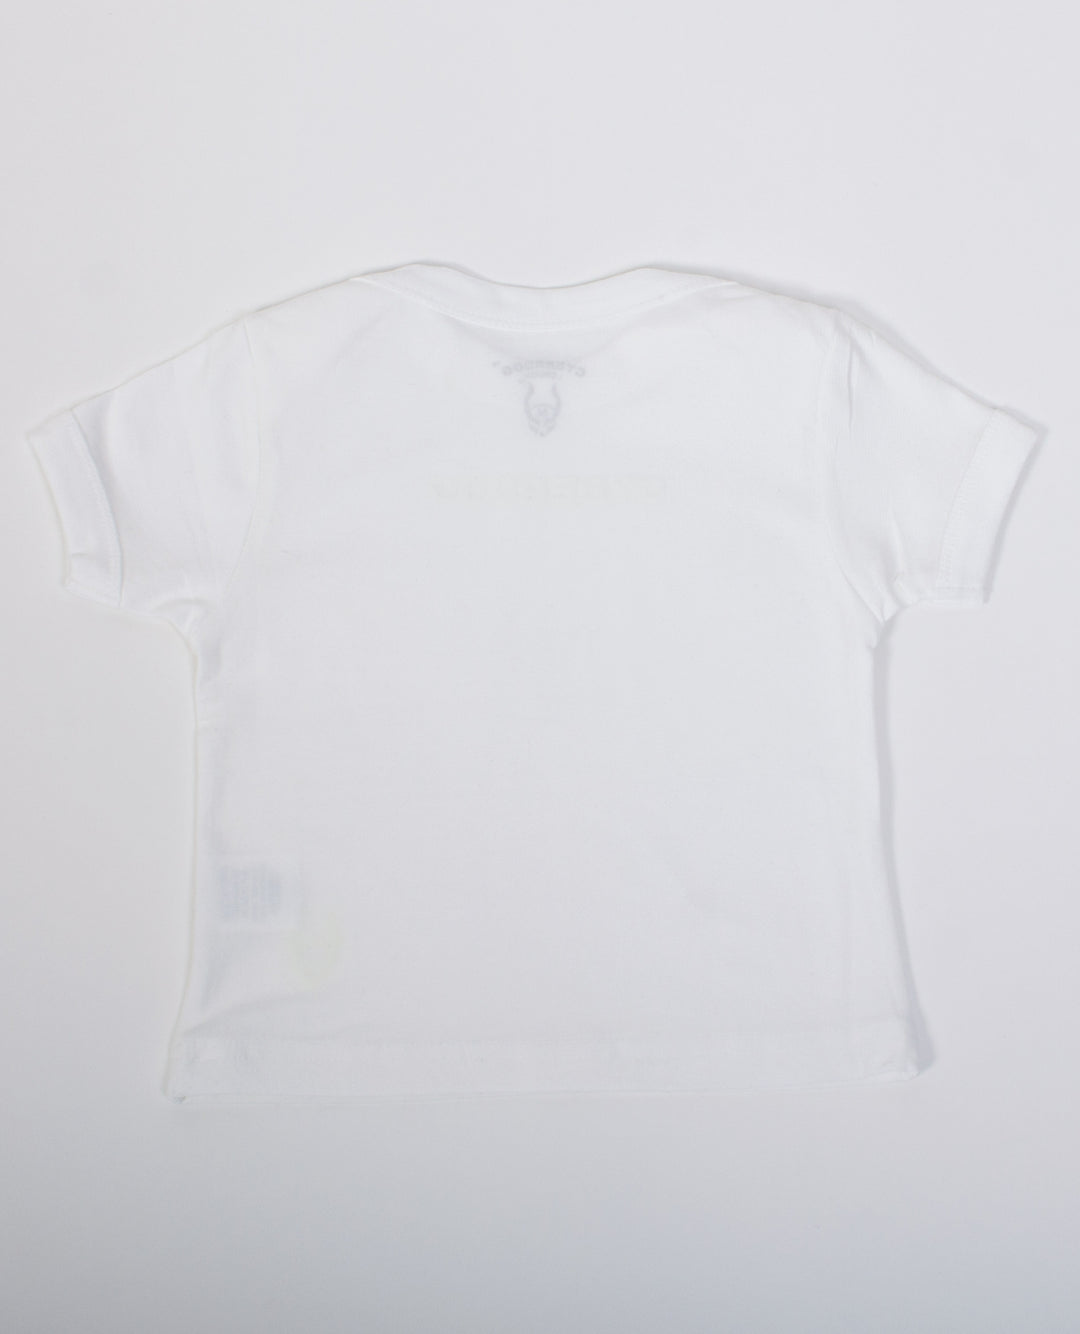 BABY TEE CYBERDOG FLUO WHITE BACK